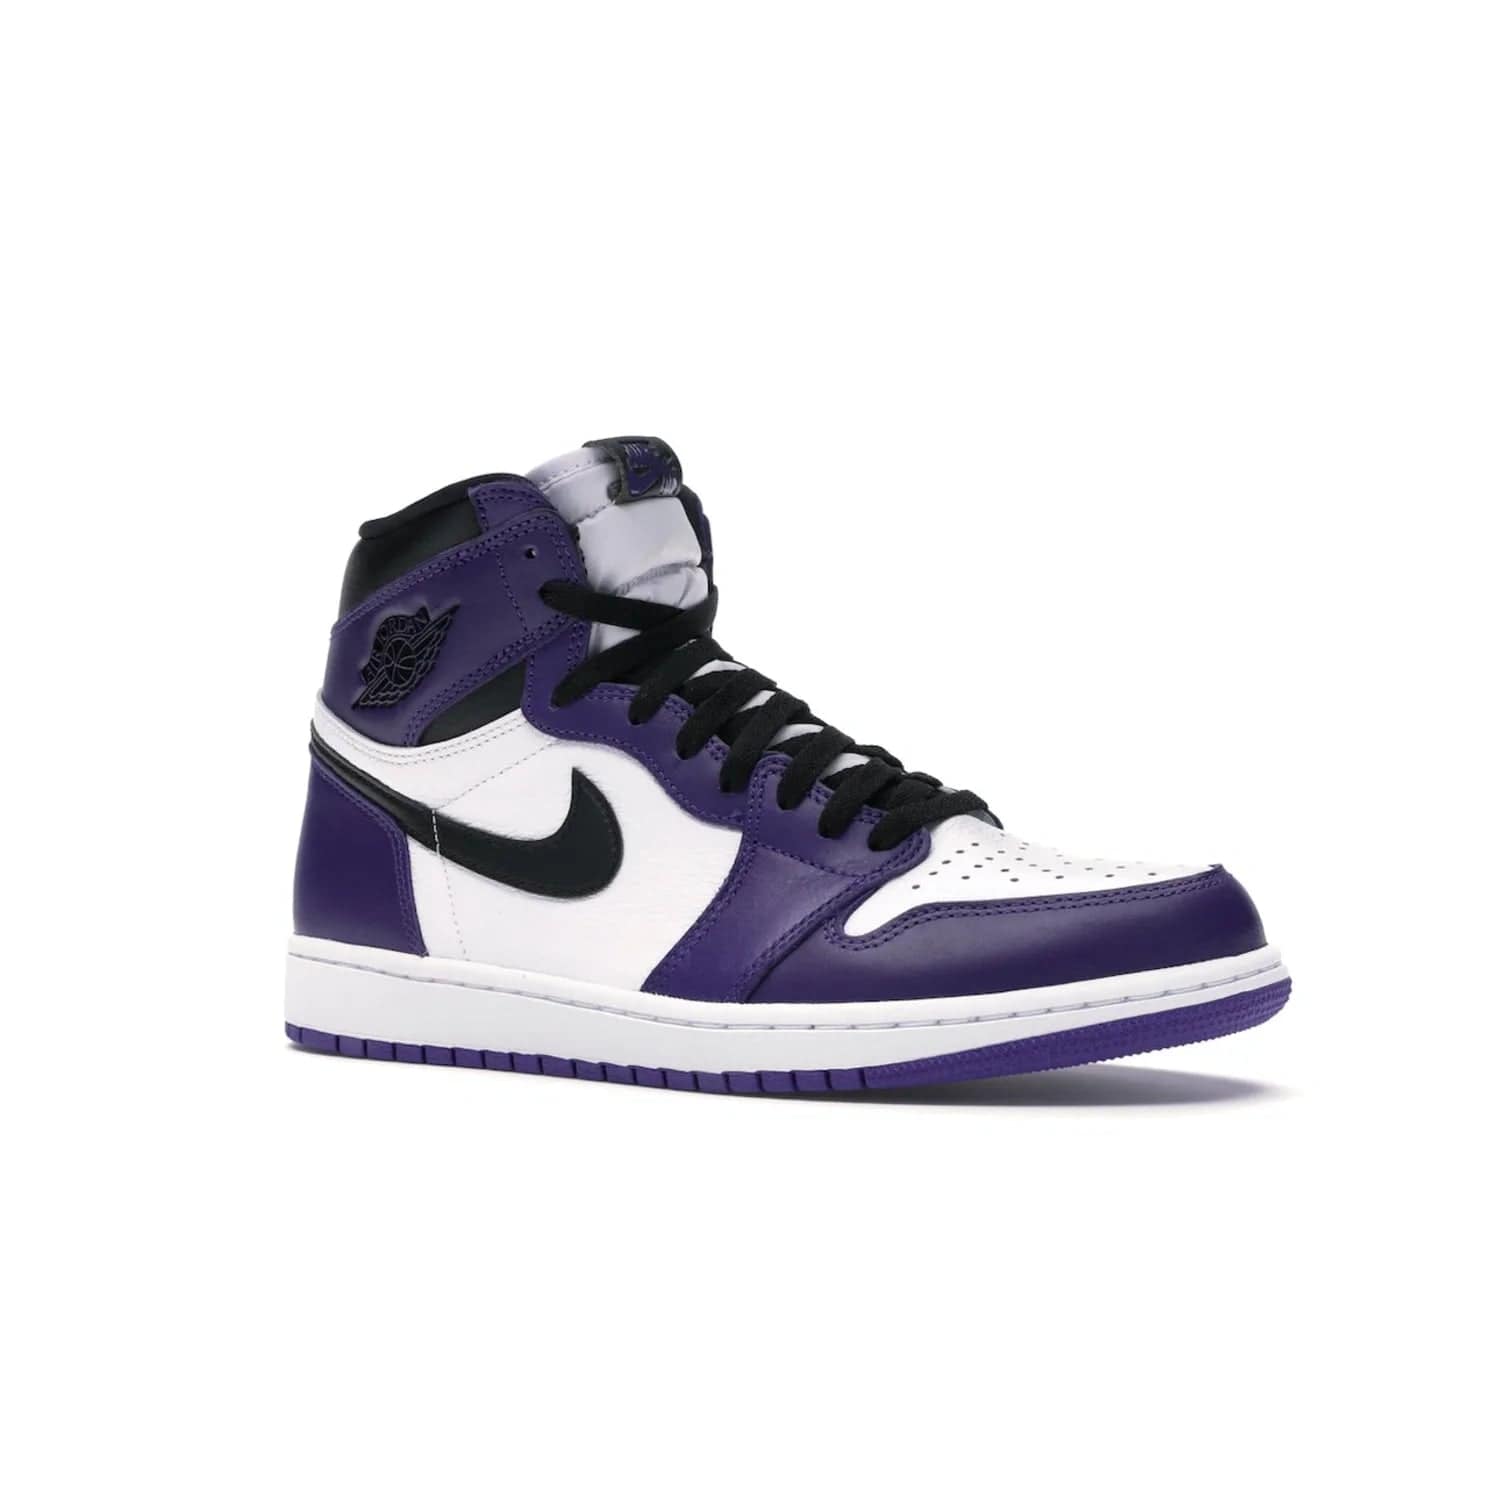 Jordan 1 Retro High Court Purple White - Image 4 - Only at www.BallersClubKickz.com - Grab the classic Jordan 1 Retro High Court Purple White and add major flavor to your collection. White leather upper with Court Purple overlays and Swoosh logo. White midsole and purple outsole. Get yours and rep your Jordan Brand.